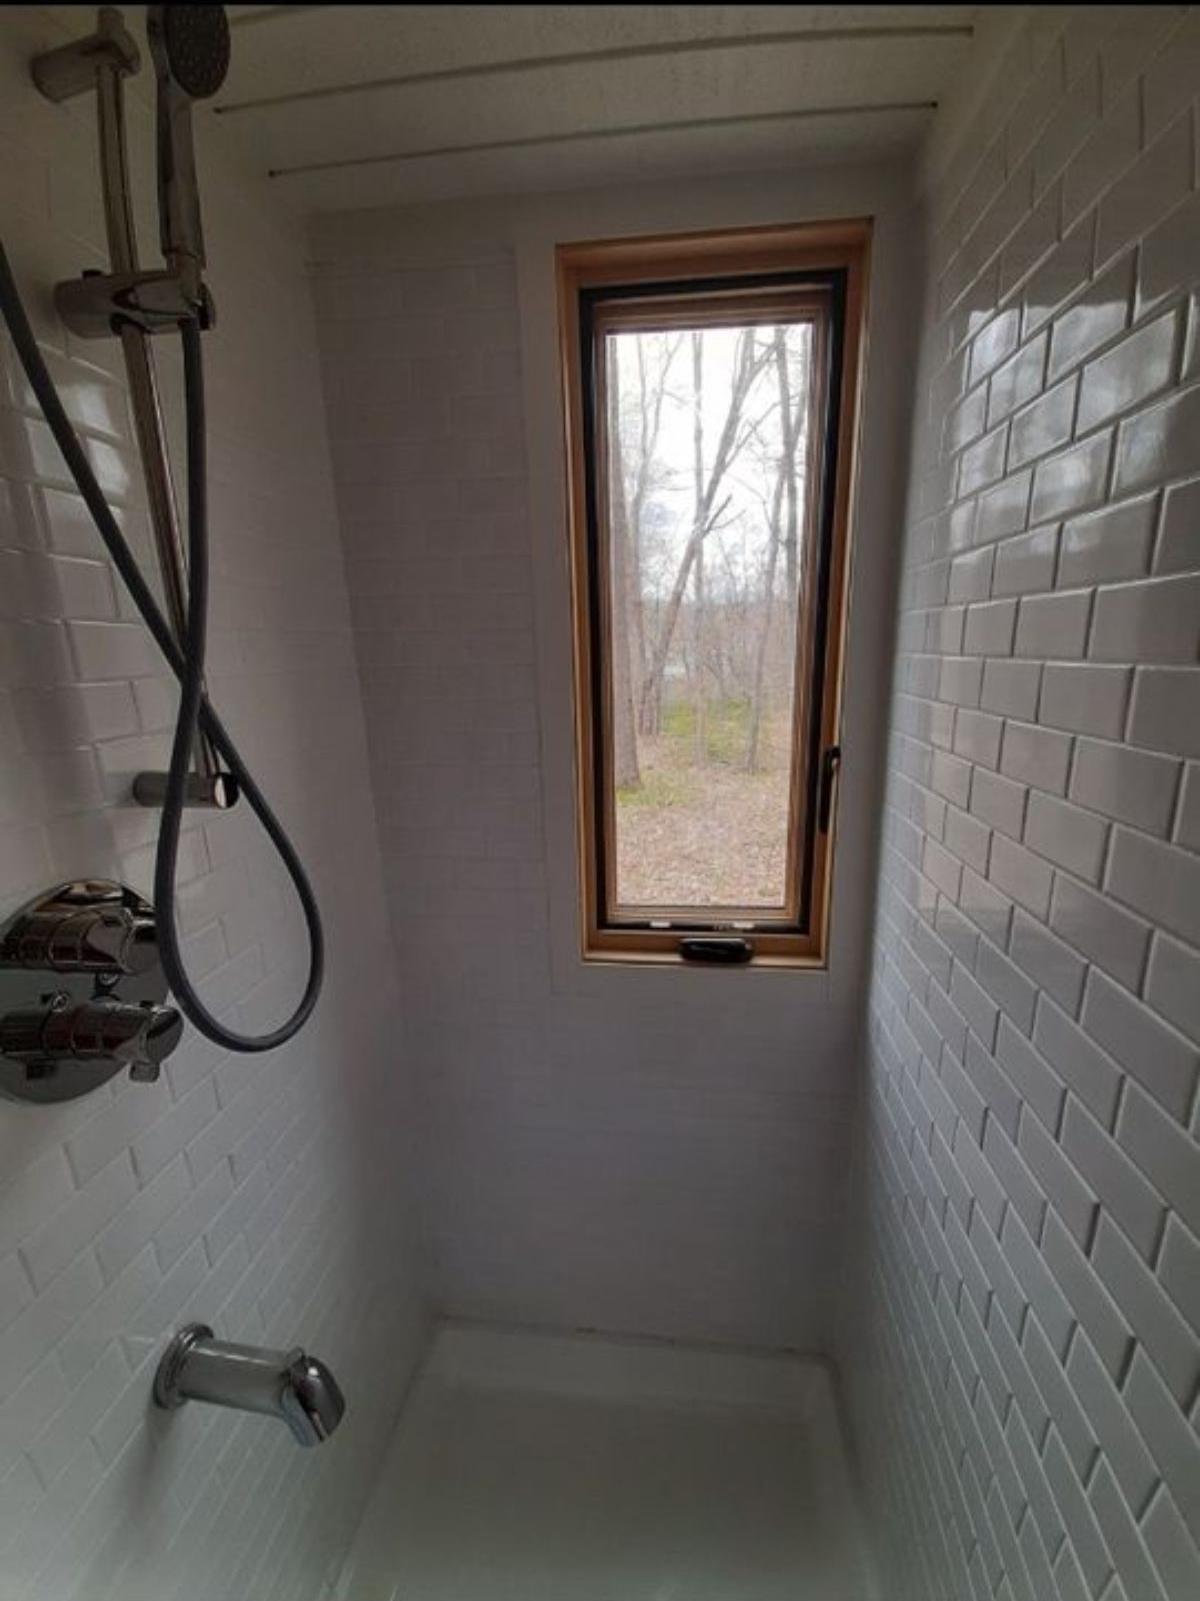 Separate shower area in bathroom of 24’ Custom Built Tiny Home